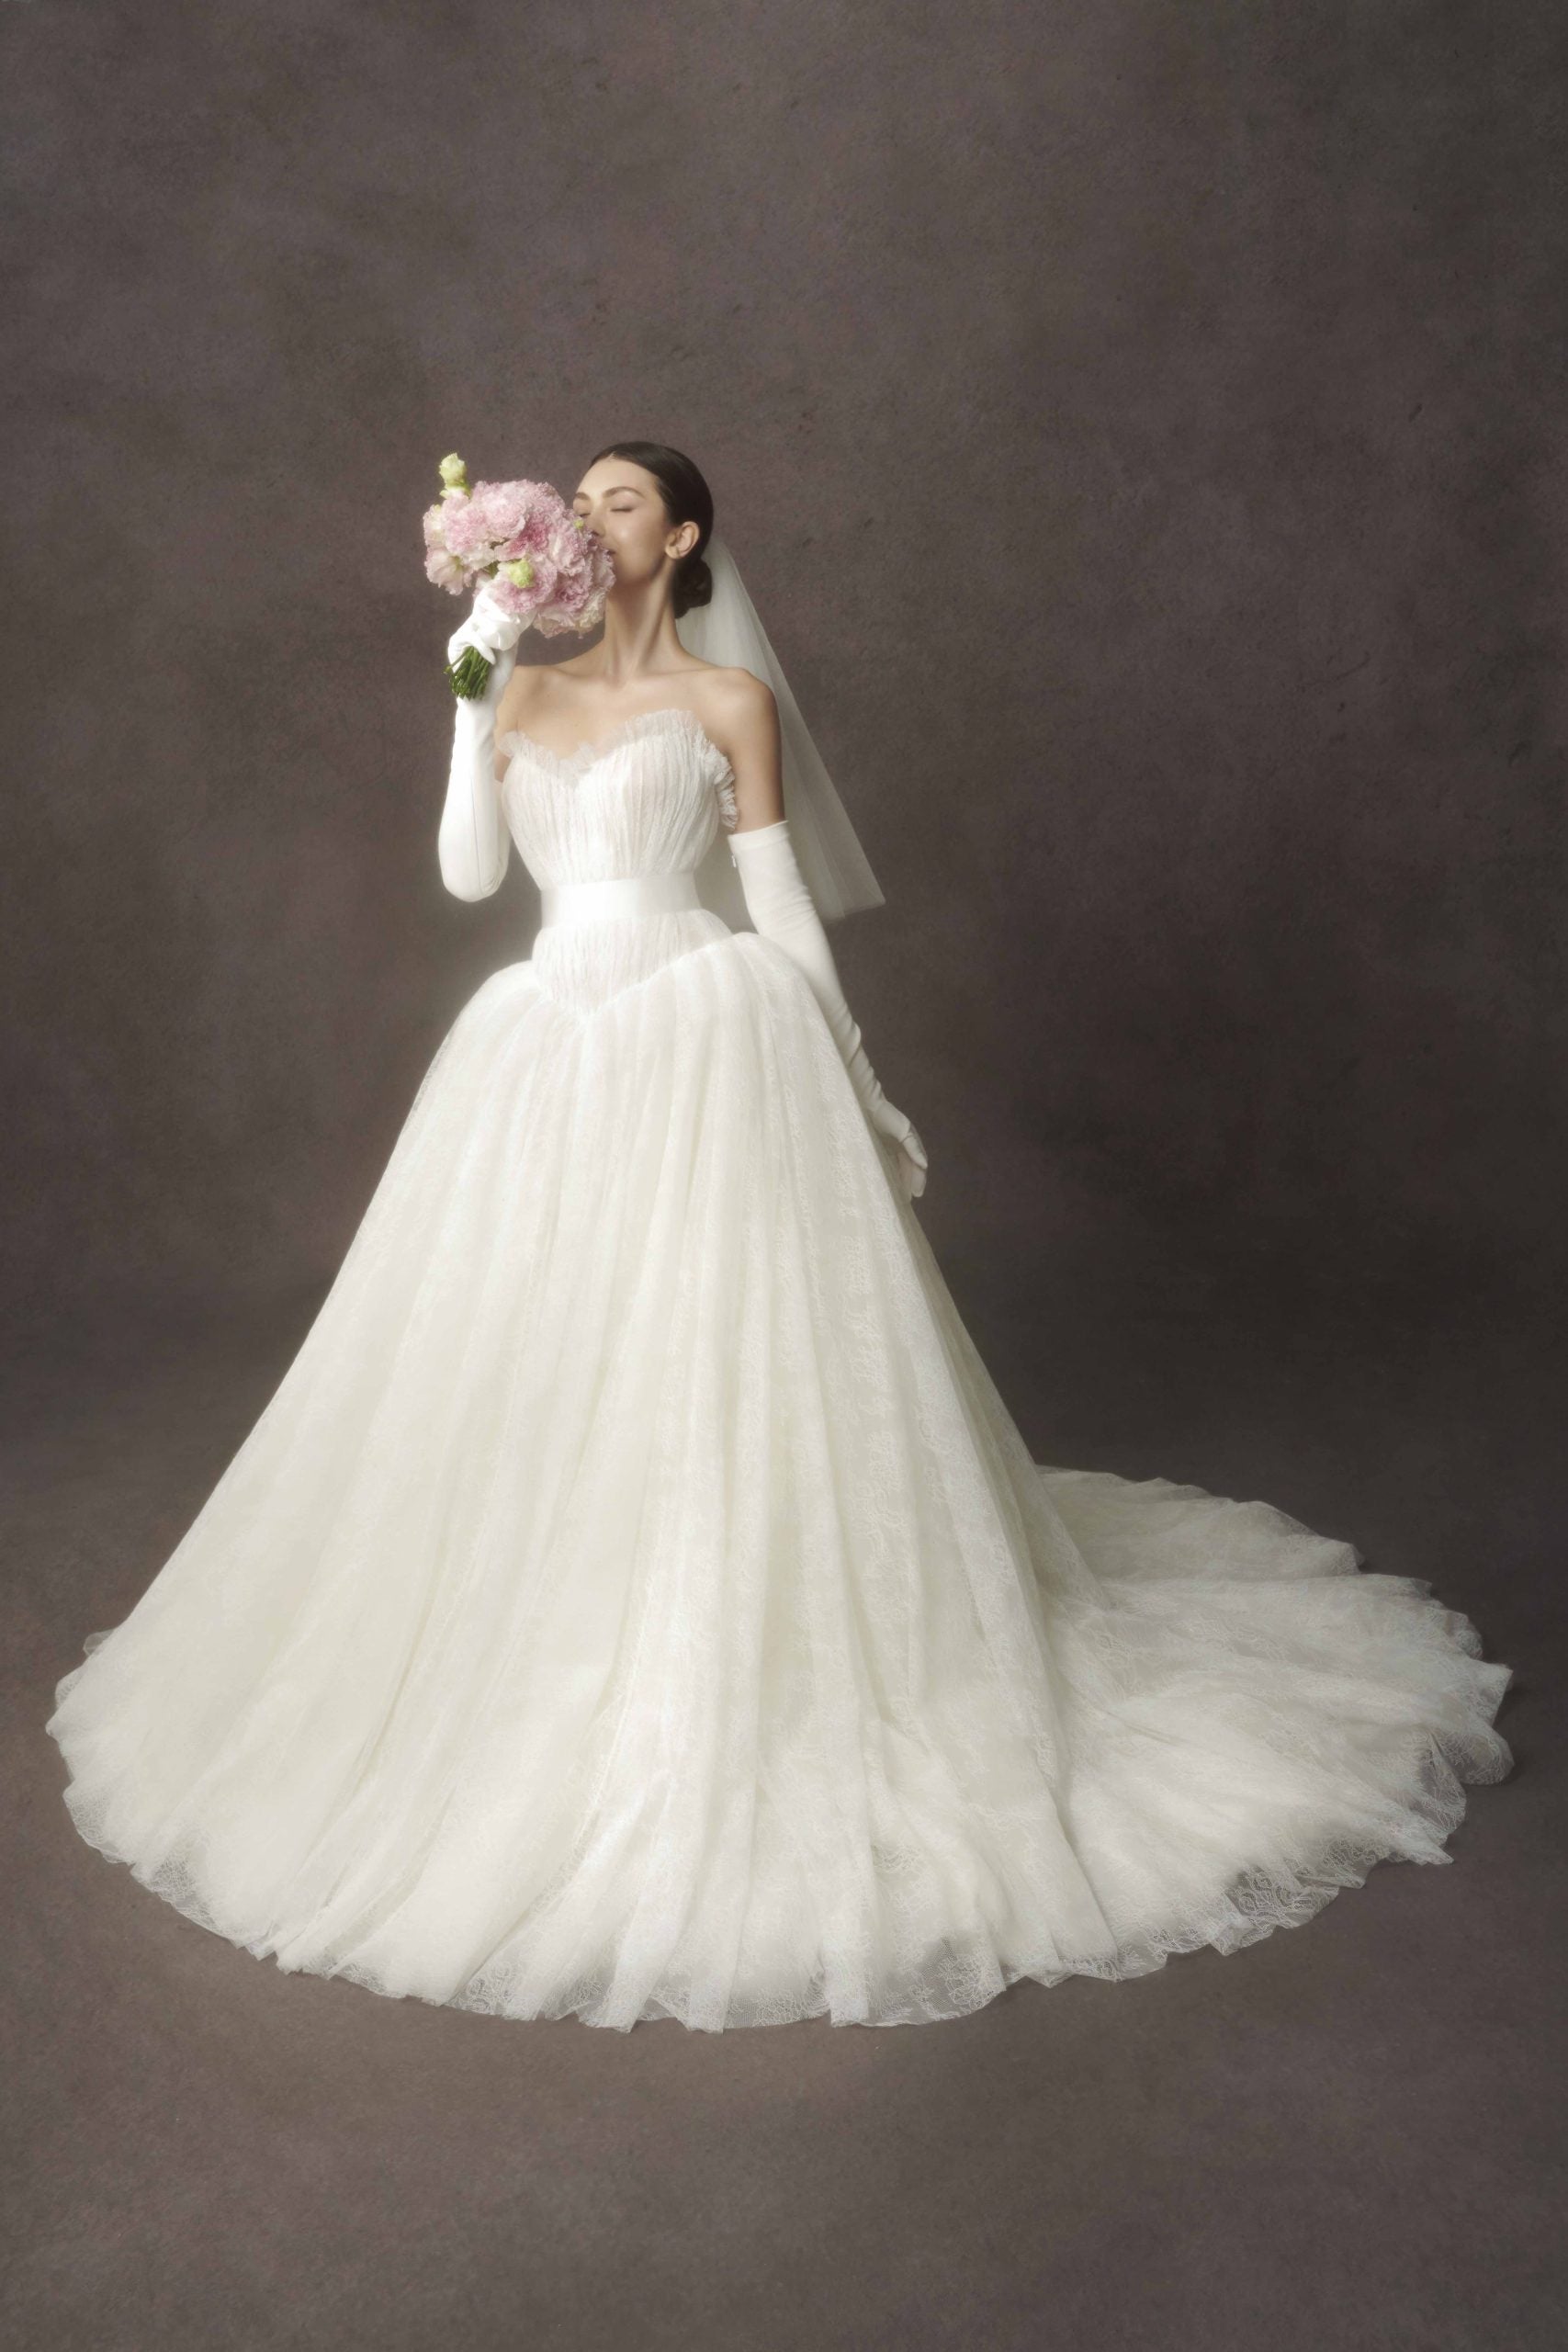 Lace Ballgown With Basque Waist by Nicole + Felicia - Image 3